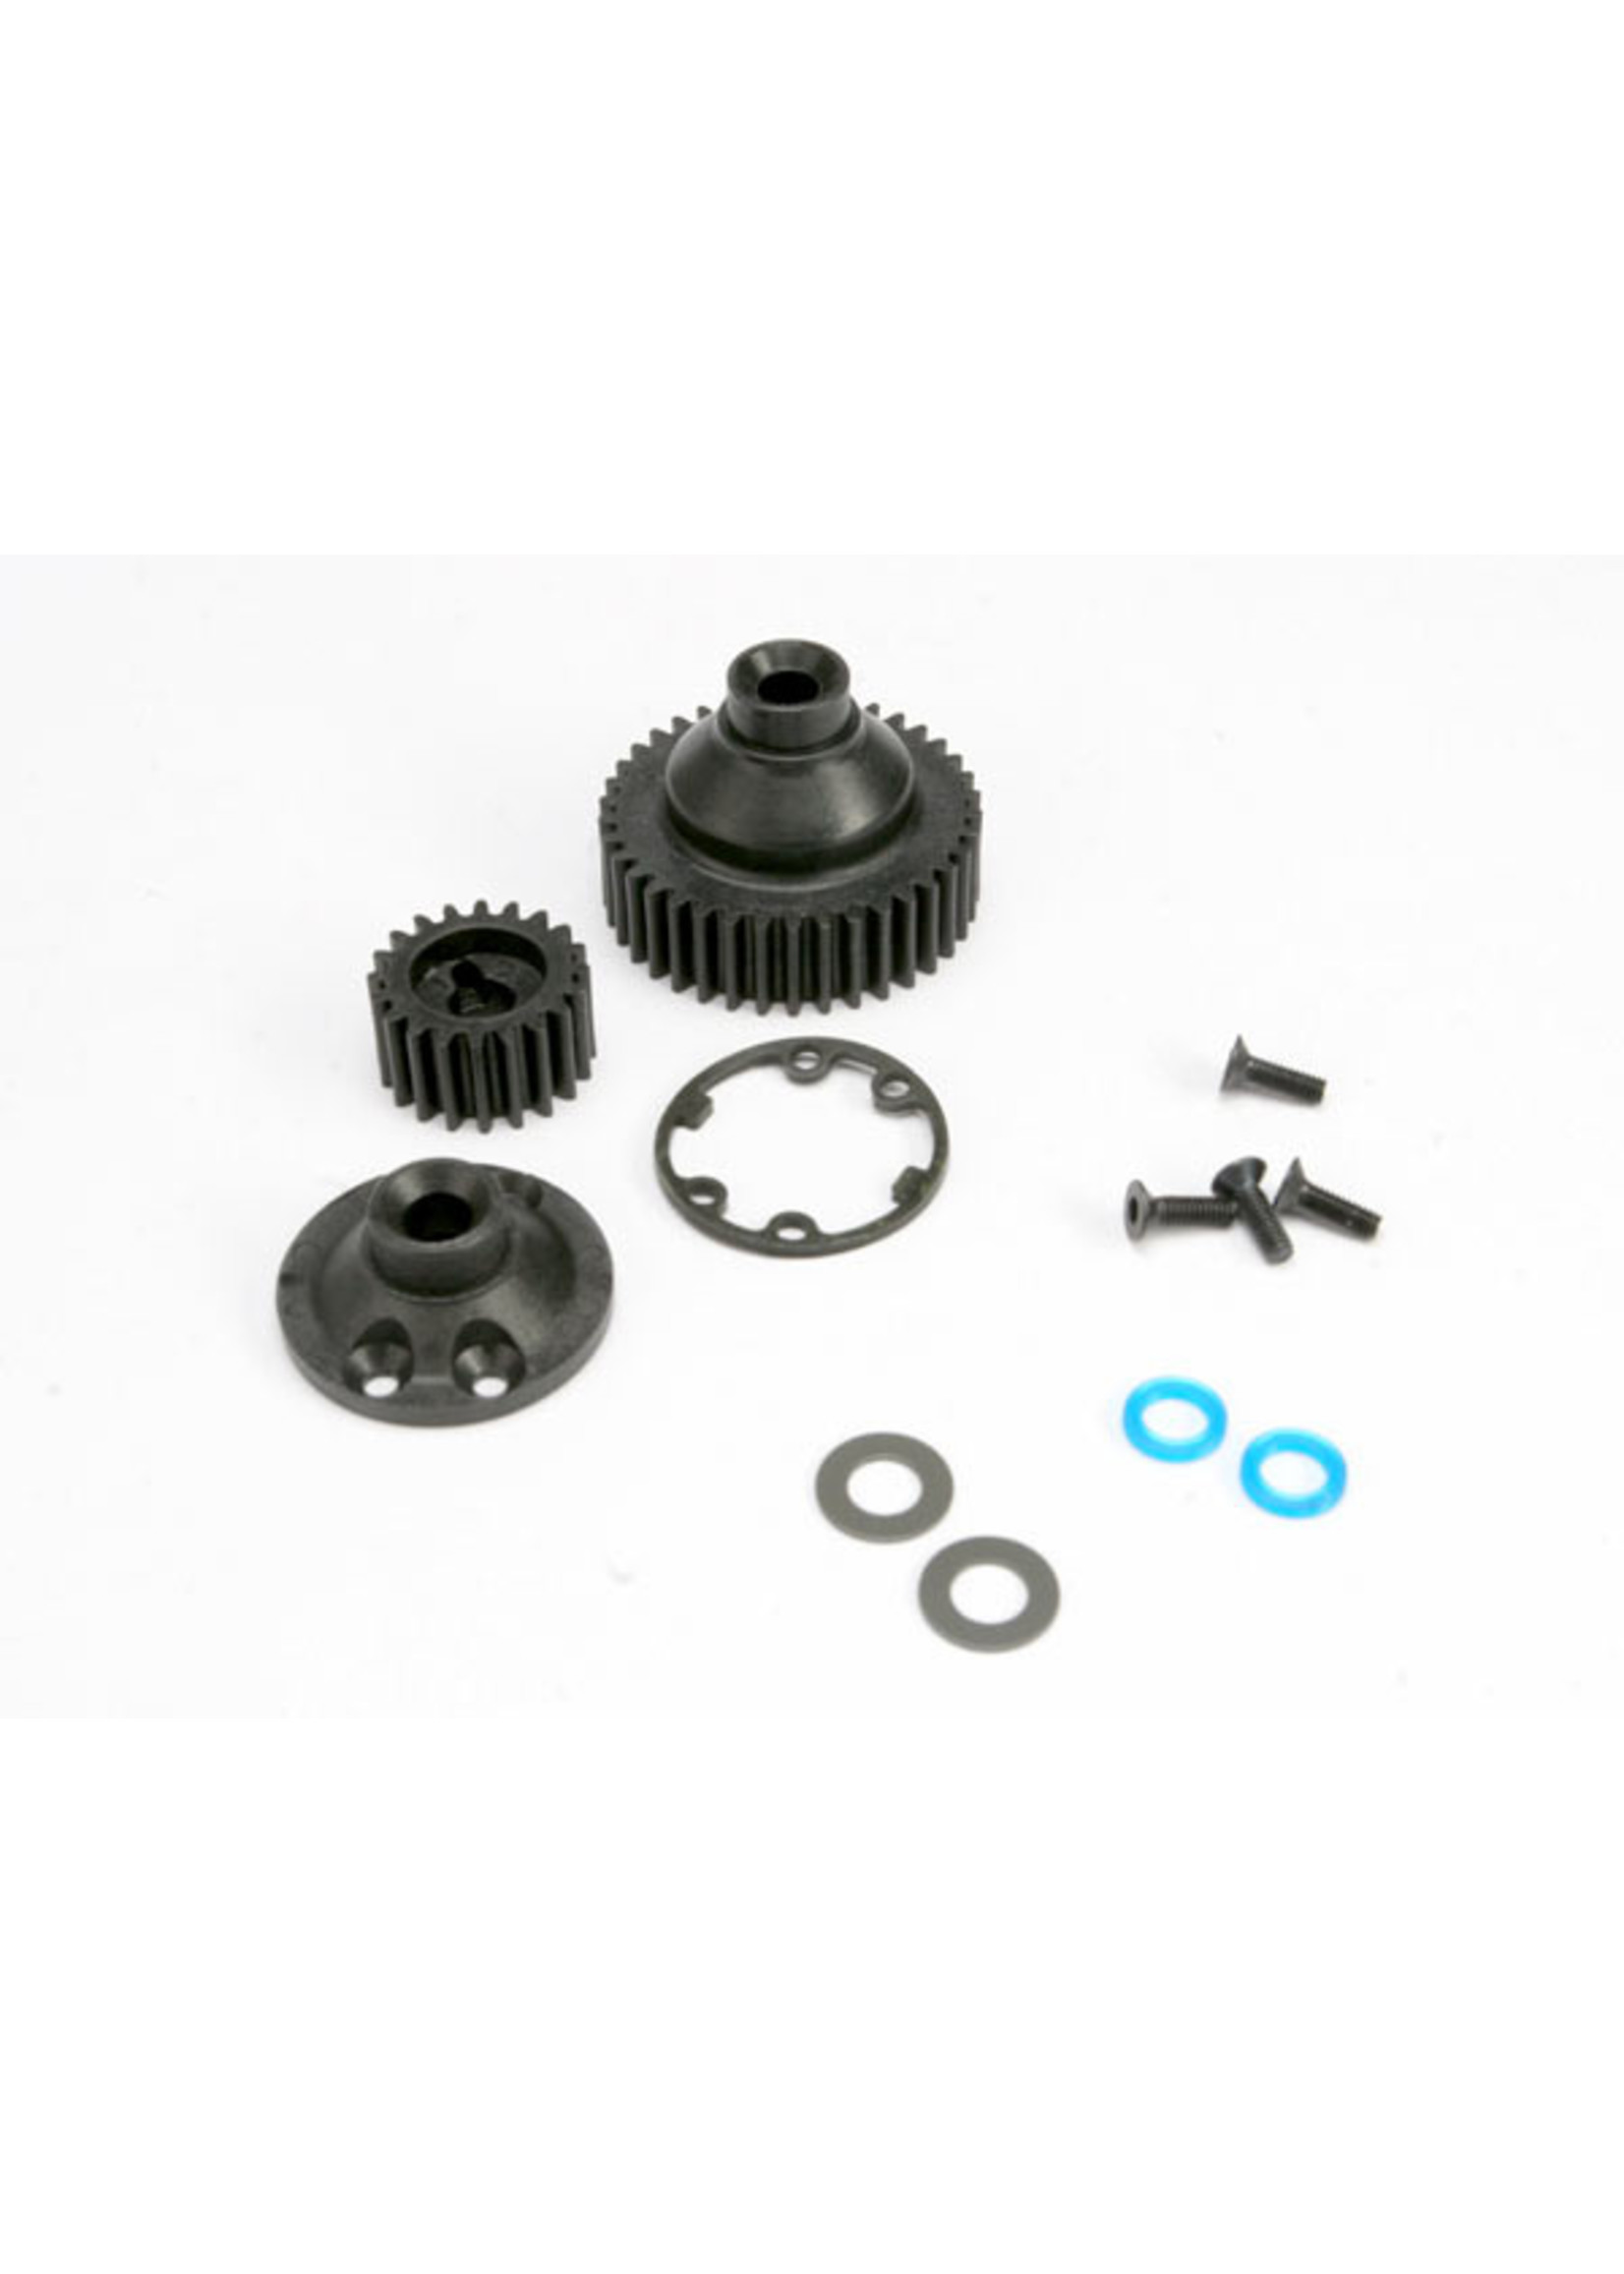 Traxxas 5579 - Differential Gears/Side Cover Plate/Gasket/Output Gear Seals (Jato)